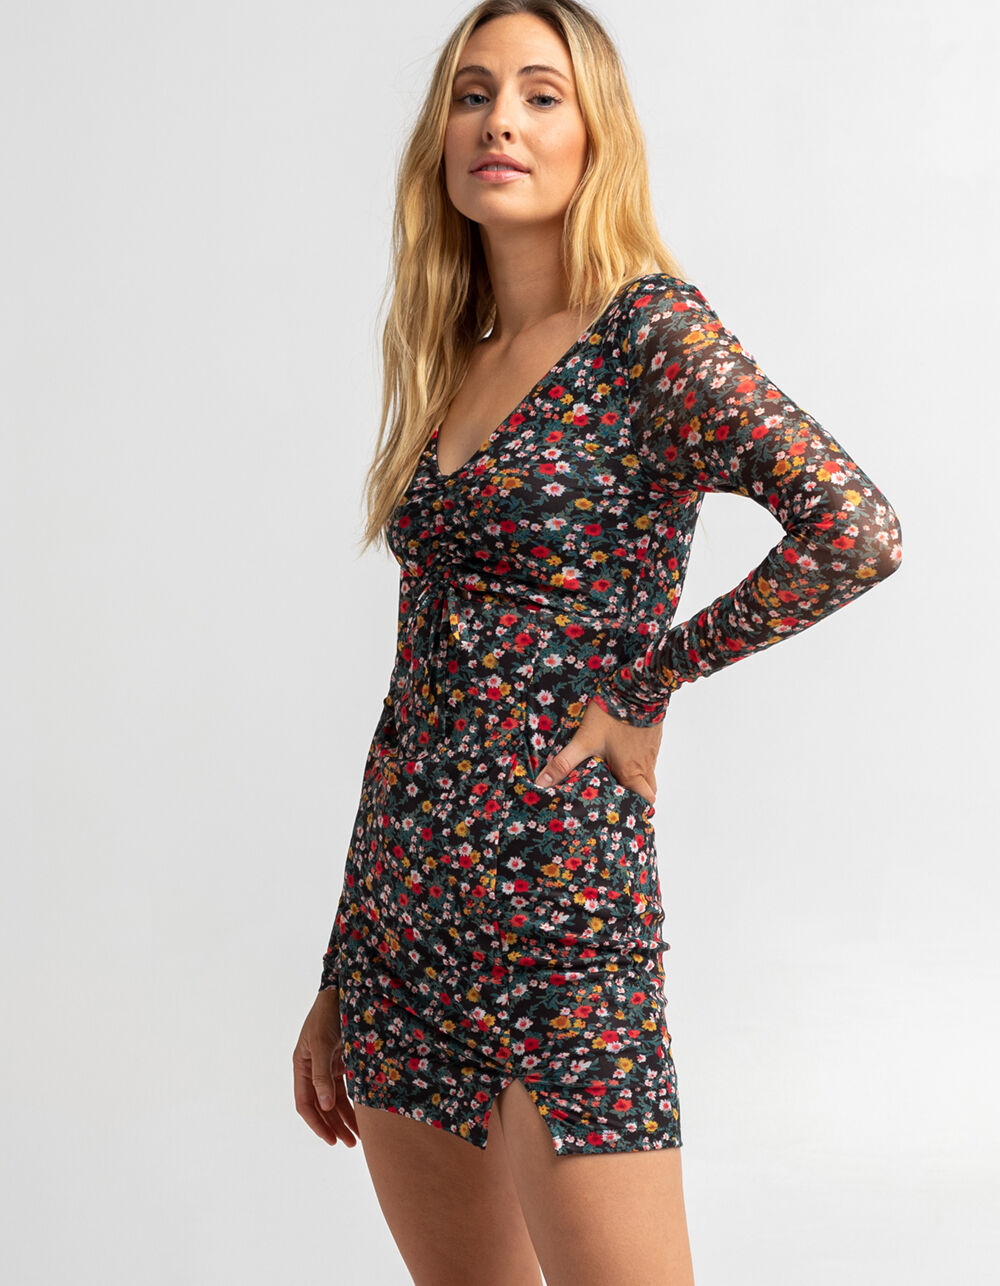 LIVE TO BE SPOILED Ditsy Mesh Dress - BLACK/RED | Tillys